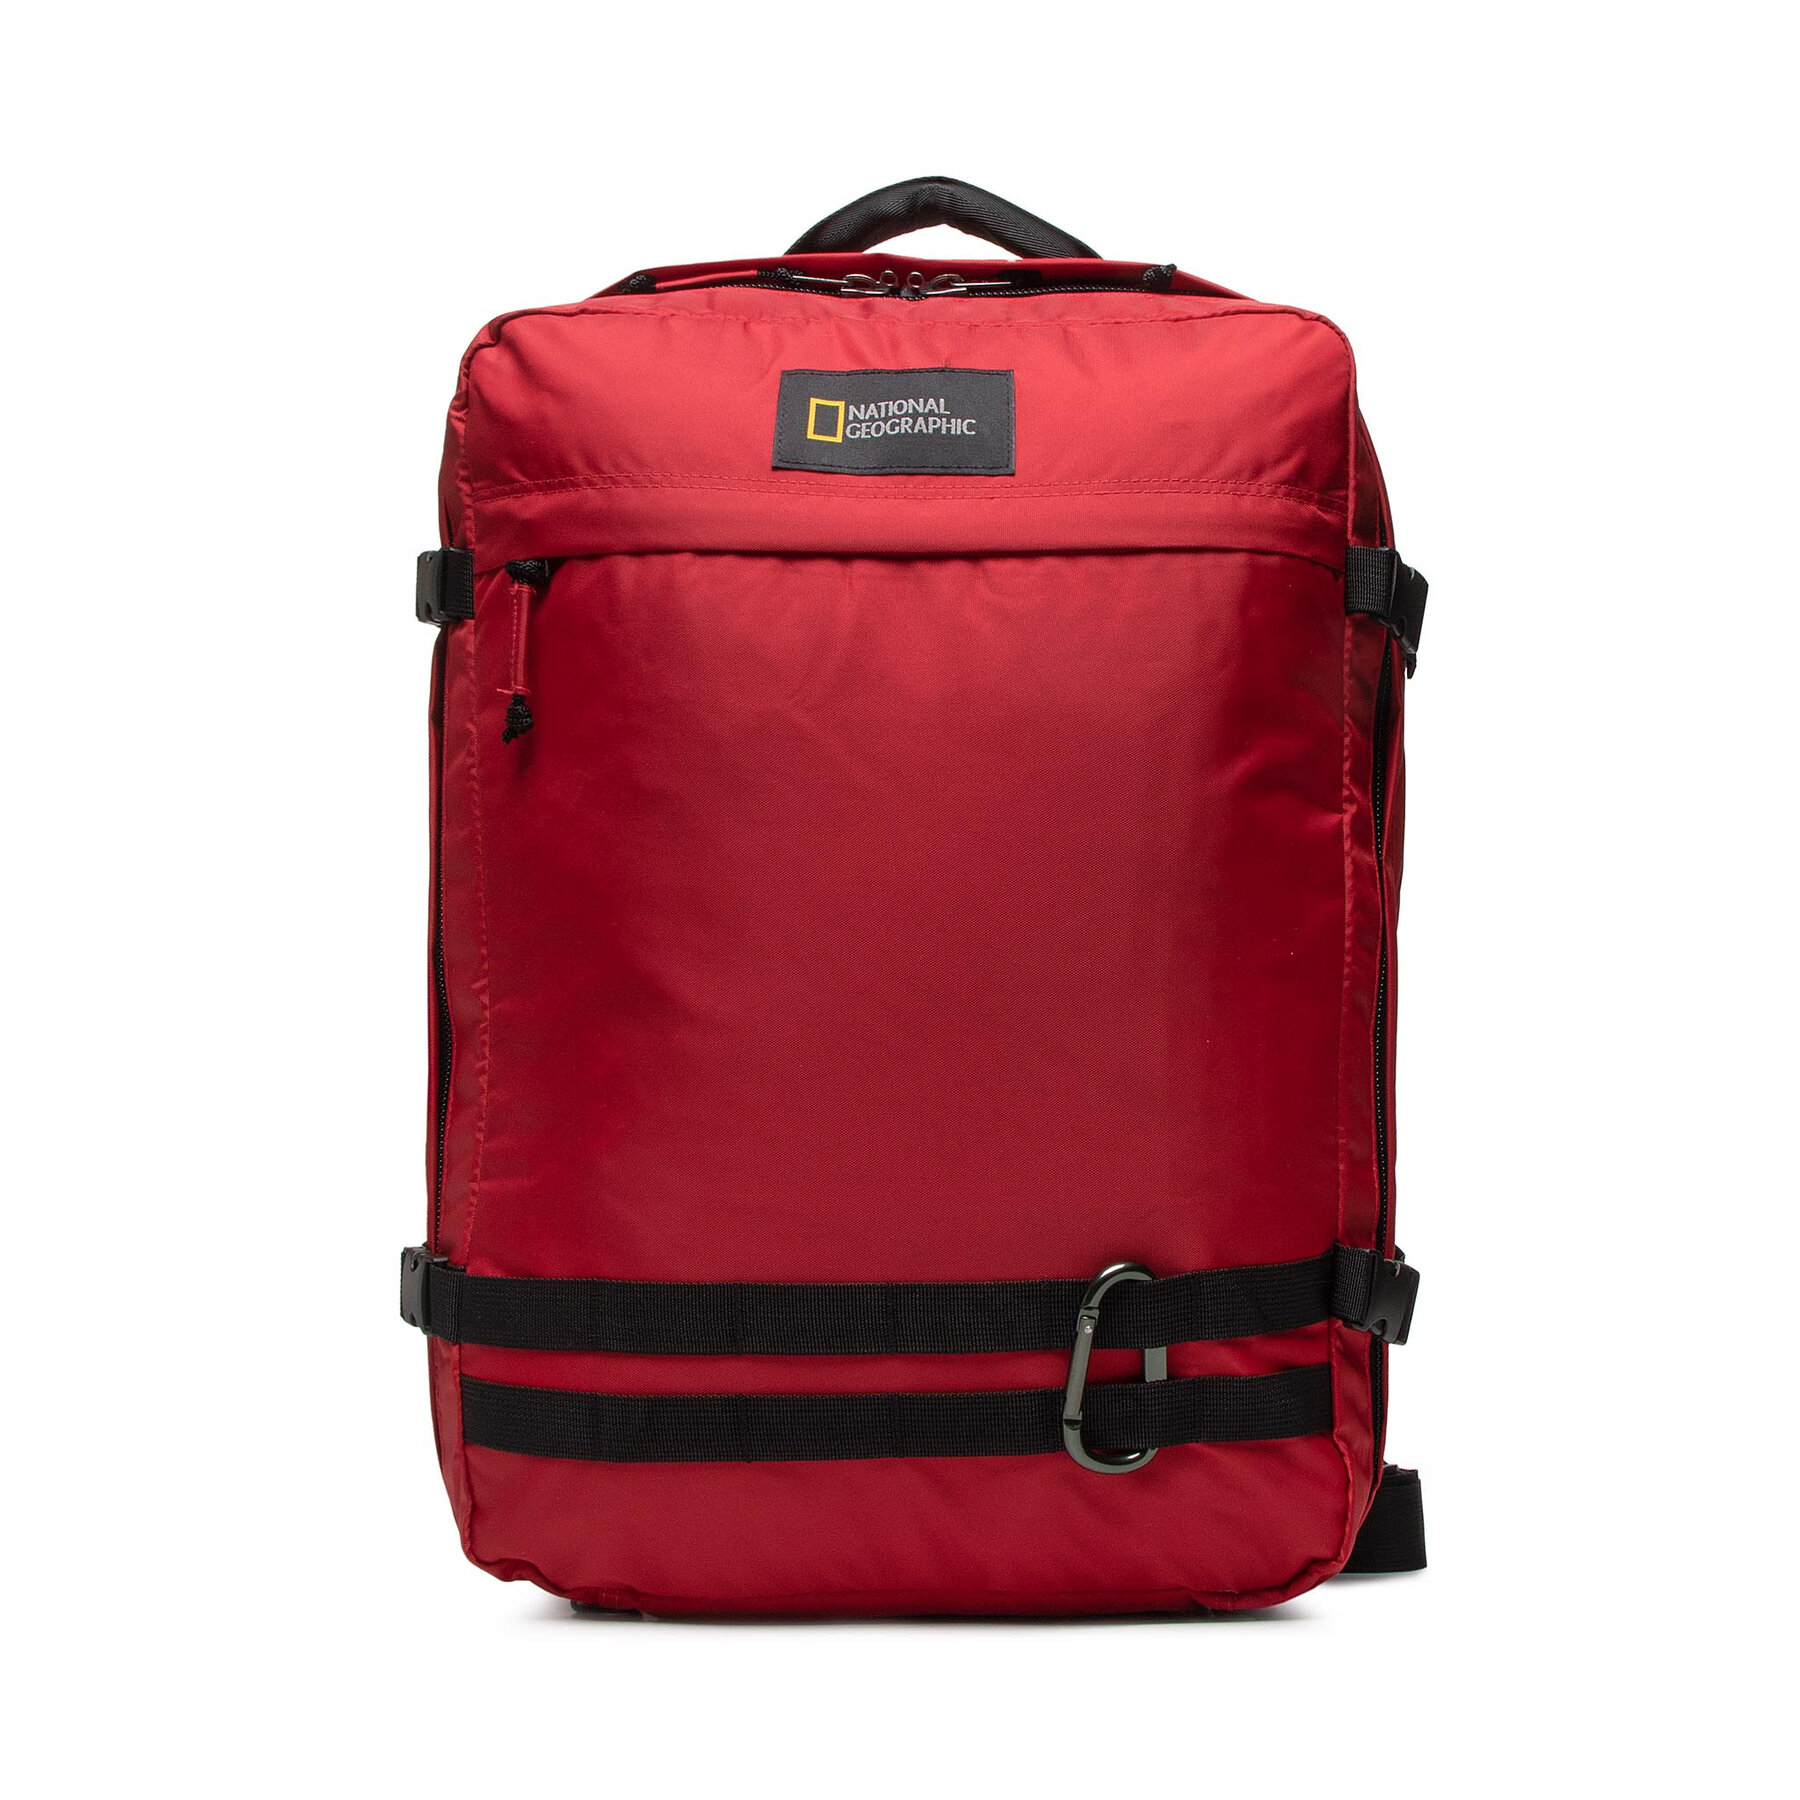 Rucksack National Geographic 3 Way Backpack N11801.35 Red von National Geographic